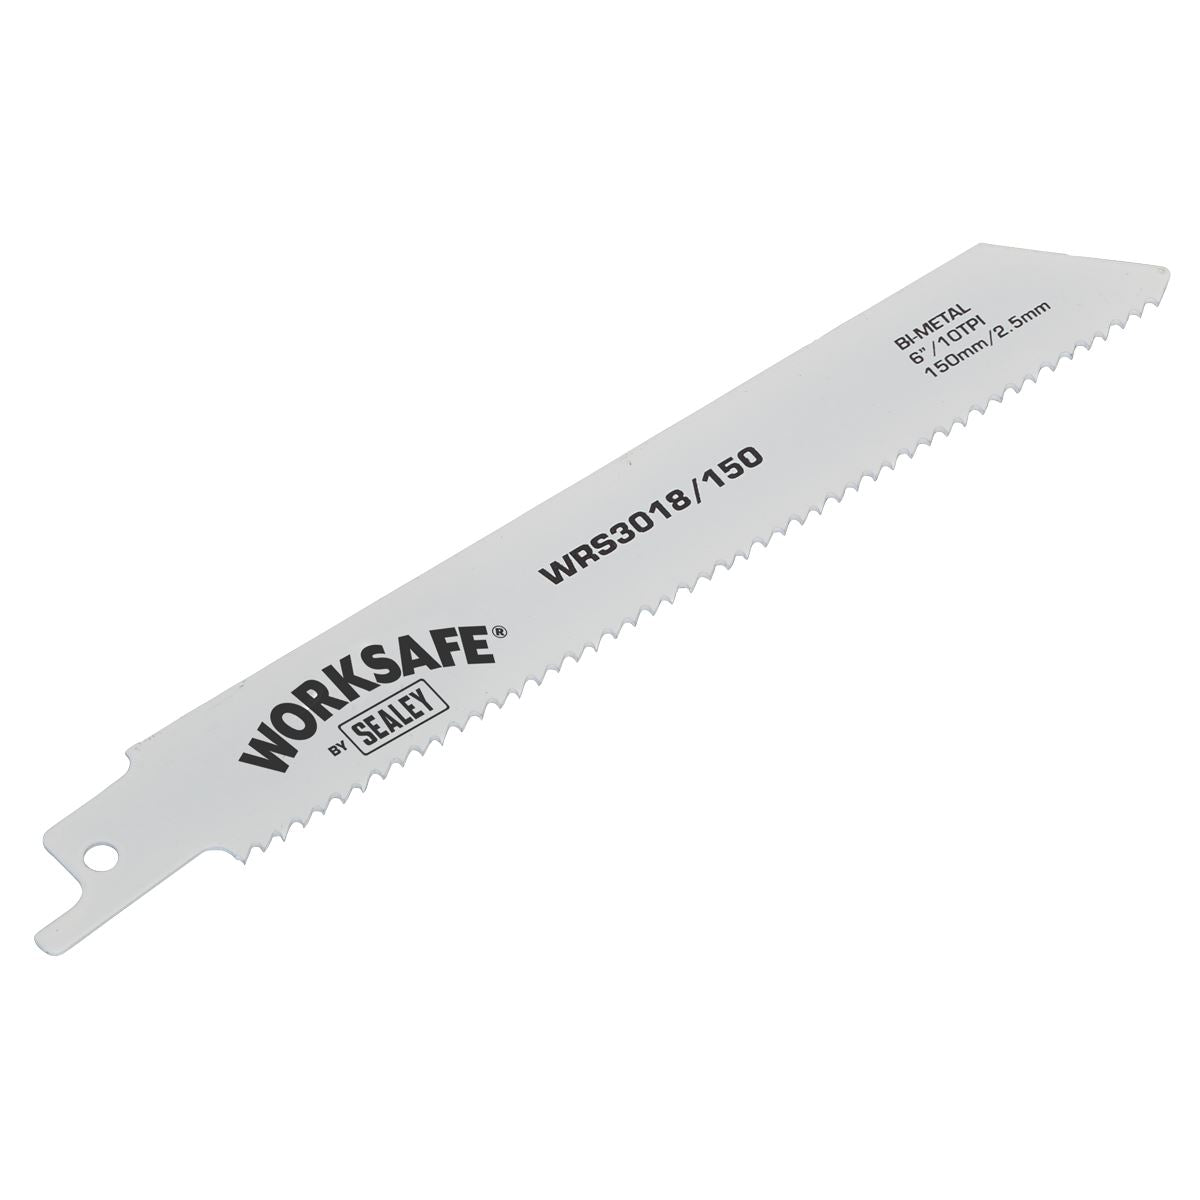 Worksafe by Sealey Reciprocating Saw Blade 150mm 10tpi - Pack of 5